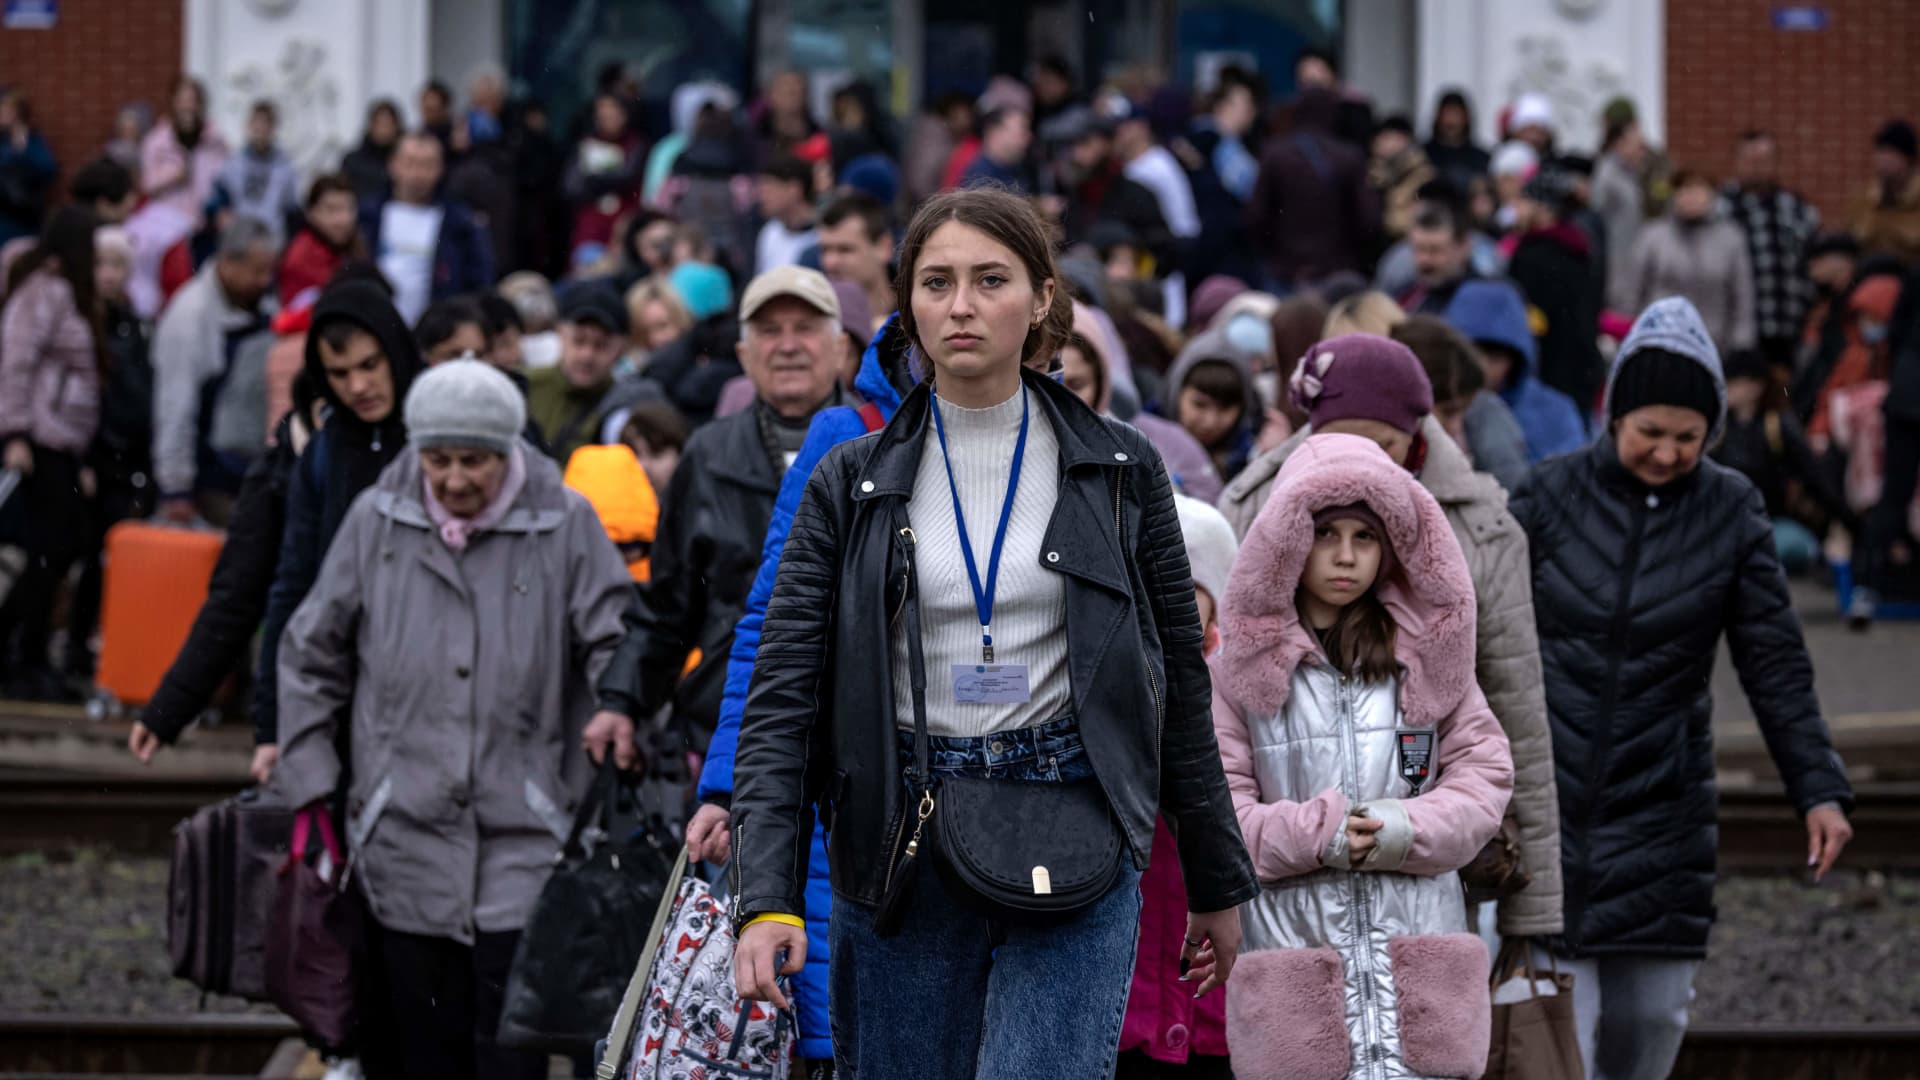 Families arrive at the main train station as they flee the eastern city of Kramatorsk, in the Donbas region on April 3, 2022.